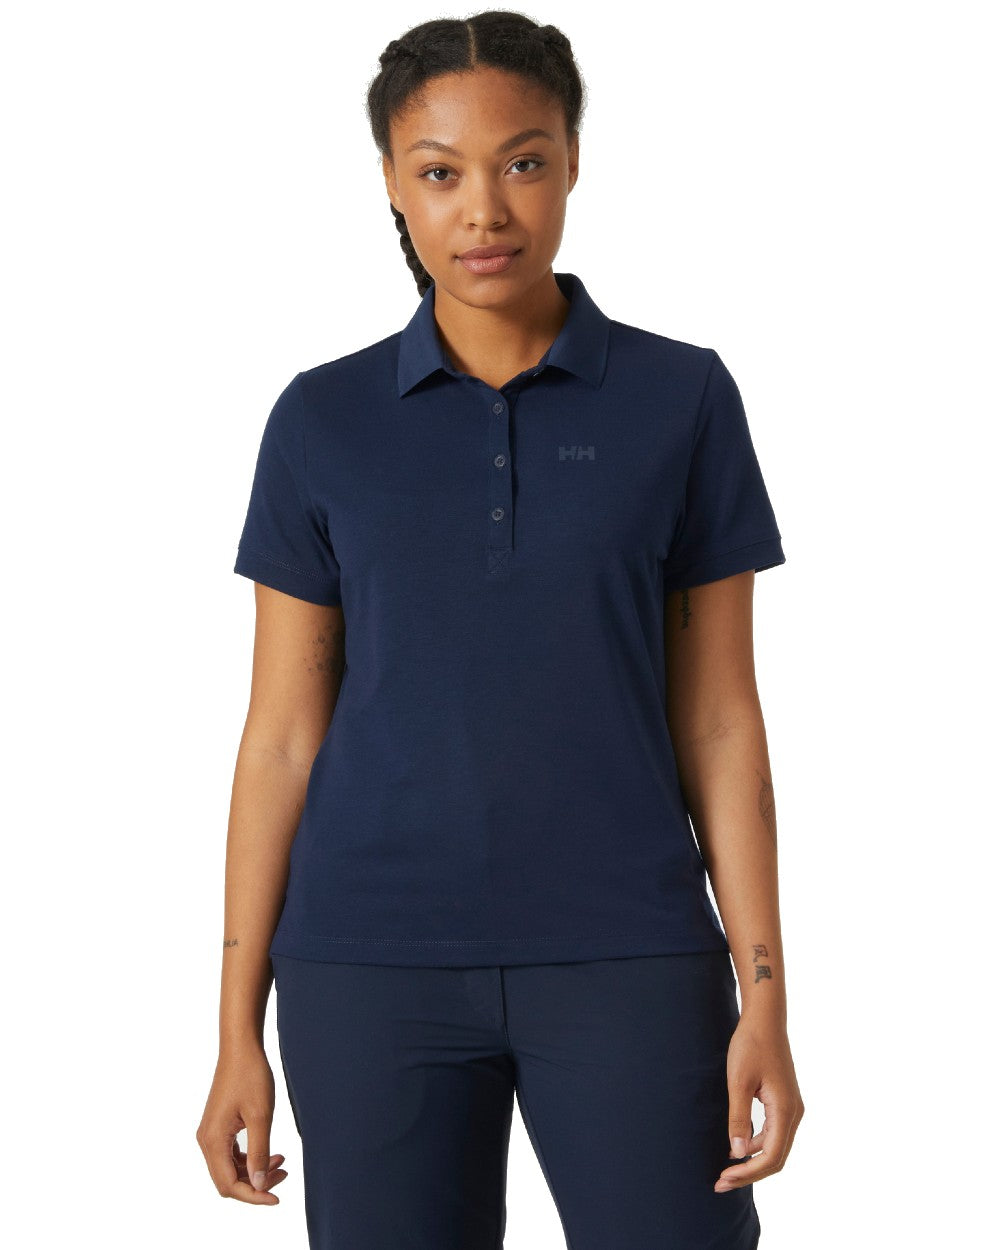 Navy coloured Helly Hansen Womens Siren Quick Dry Polo T-shirt on white background 